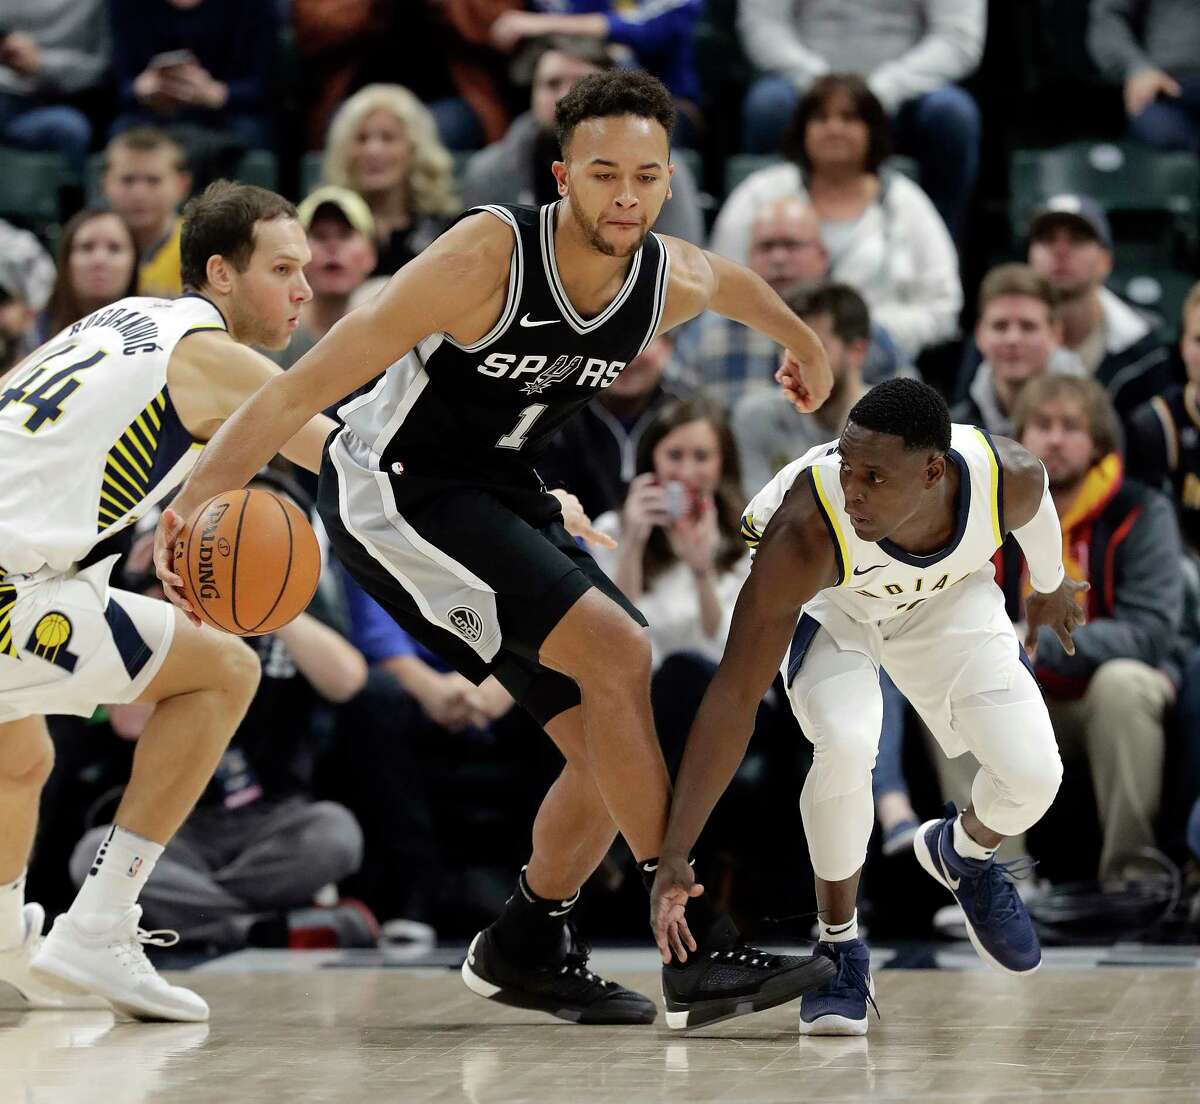 San Antonio Spurs' Kyle Anderson (1) is defended by Indiana Pacers' Darren Collison (2) during the first half of an NBA basketball game, Sunday, Oct. 29, 2017, in Indianapolis. (AP Photo/Darron Cummings)